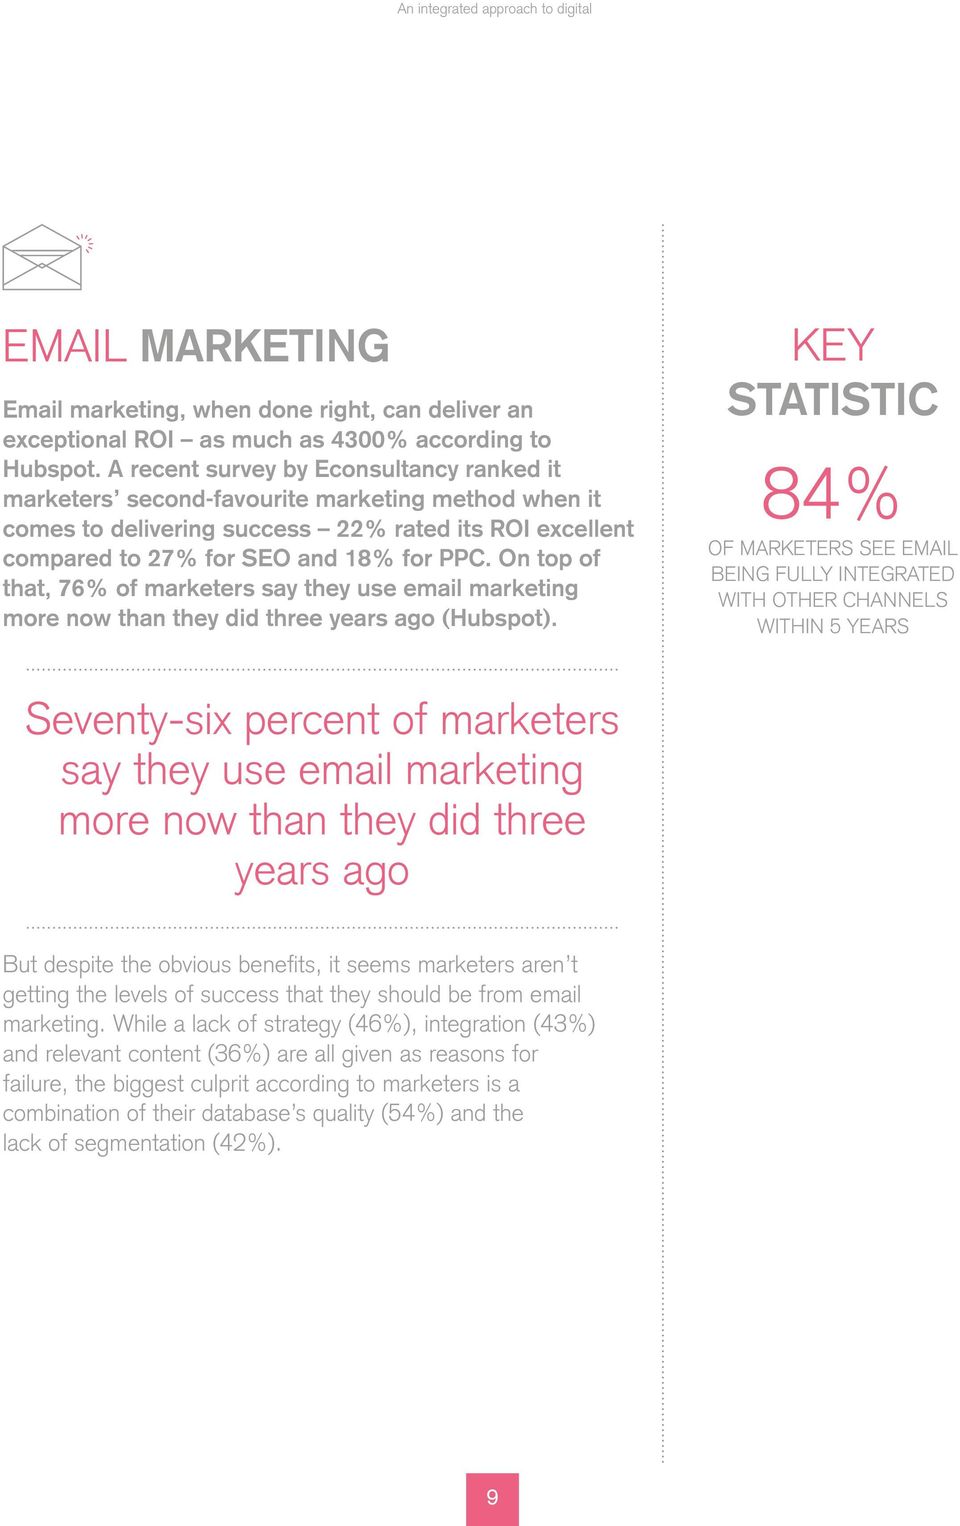 On top of that, 76% of marketers say they use email marketing more now than they did three years ago (Hubspot).